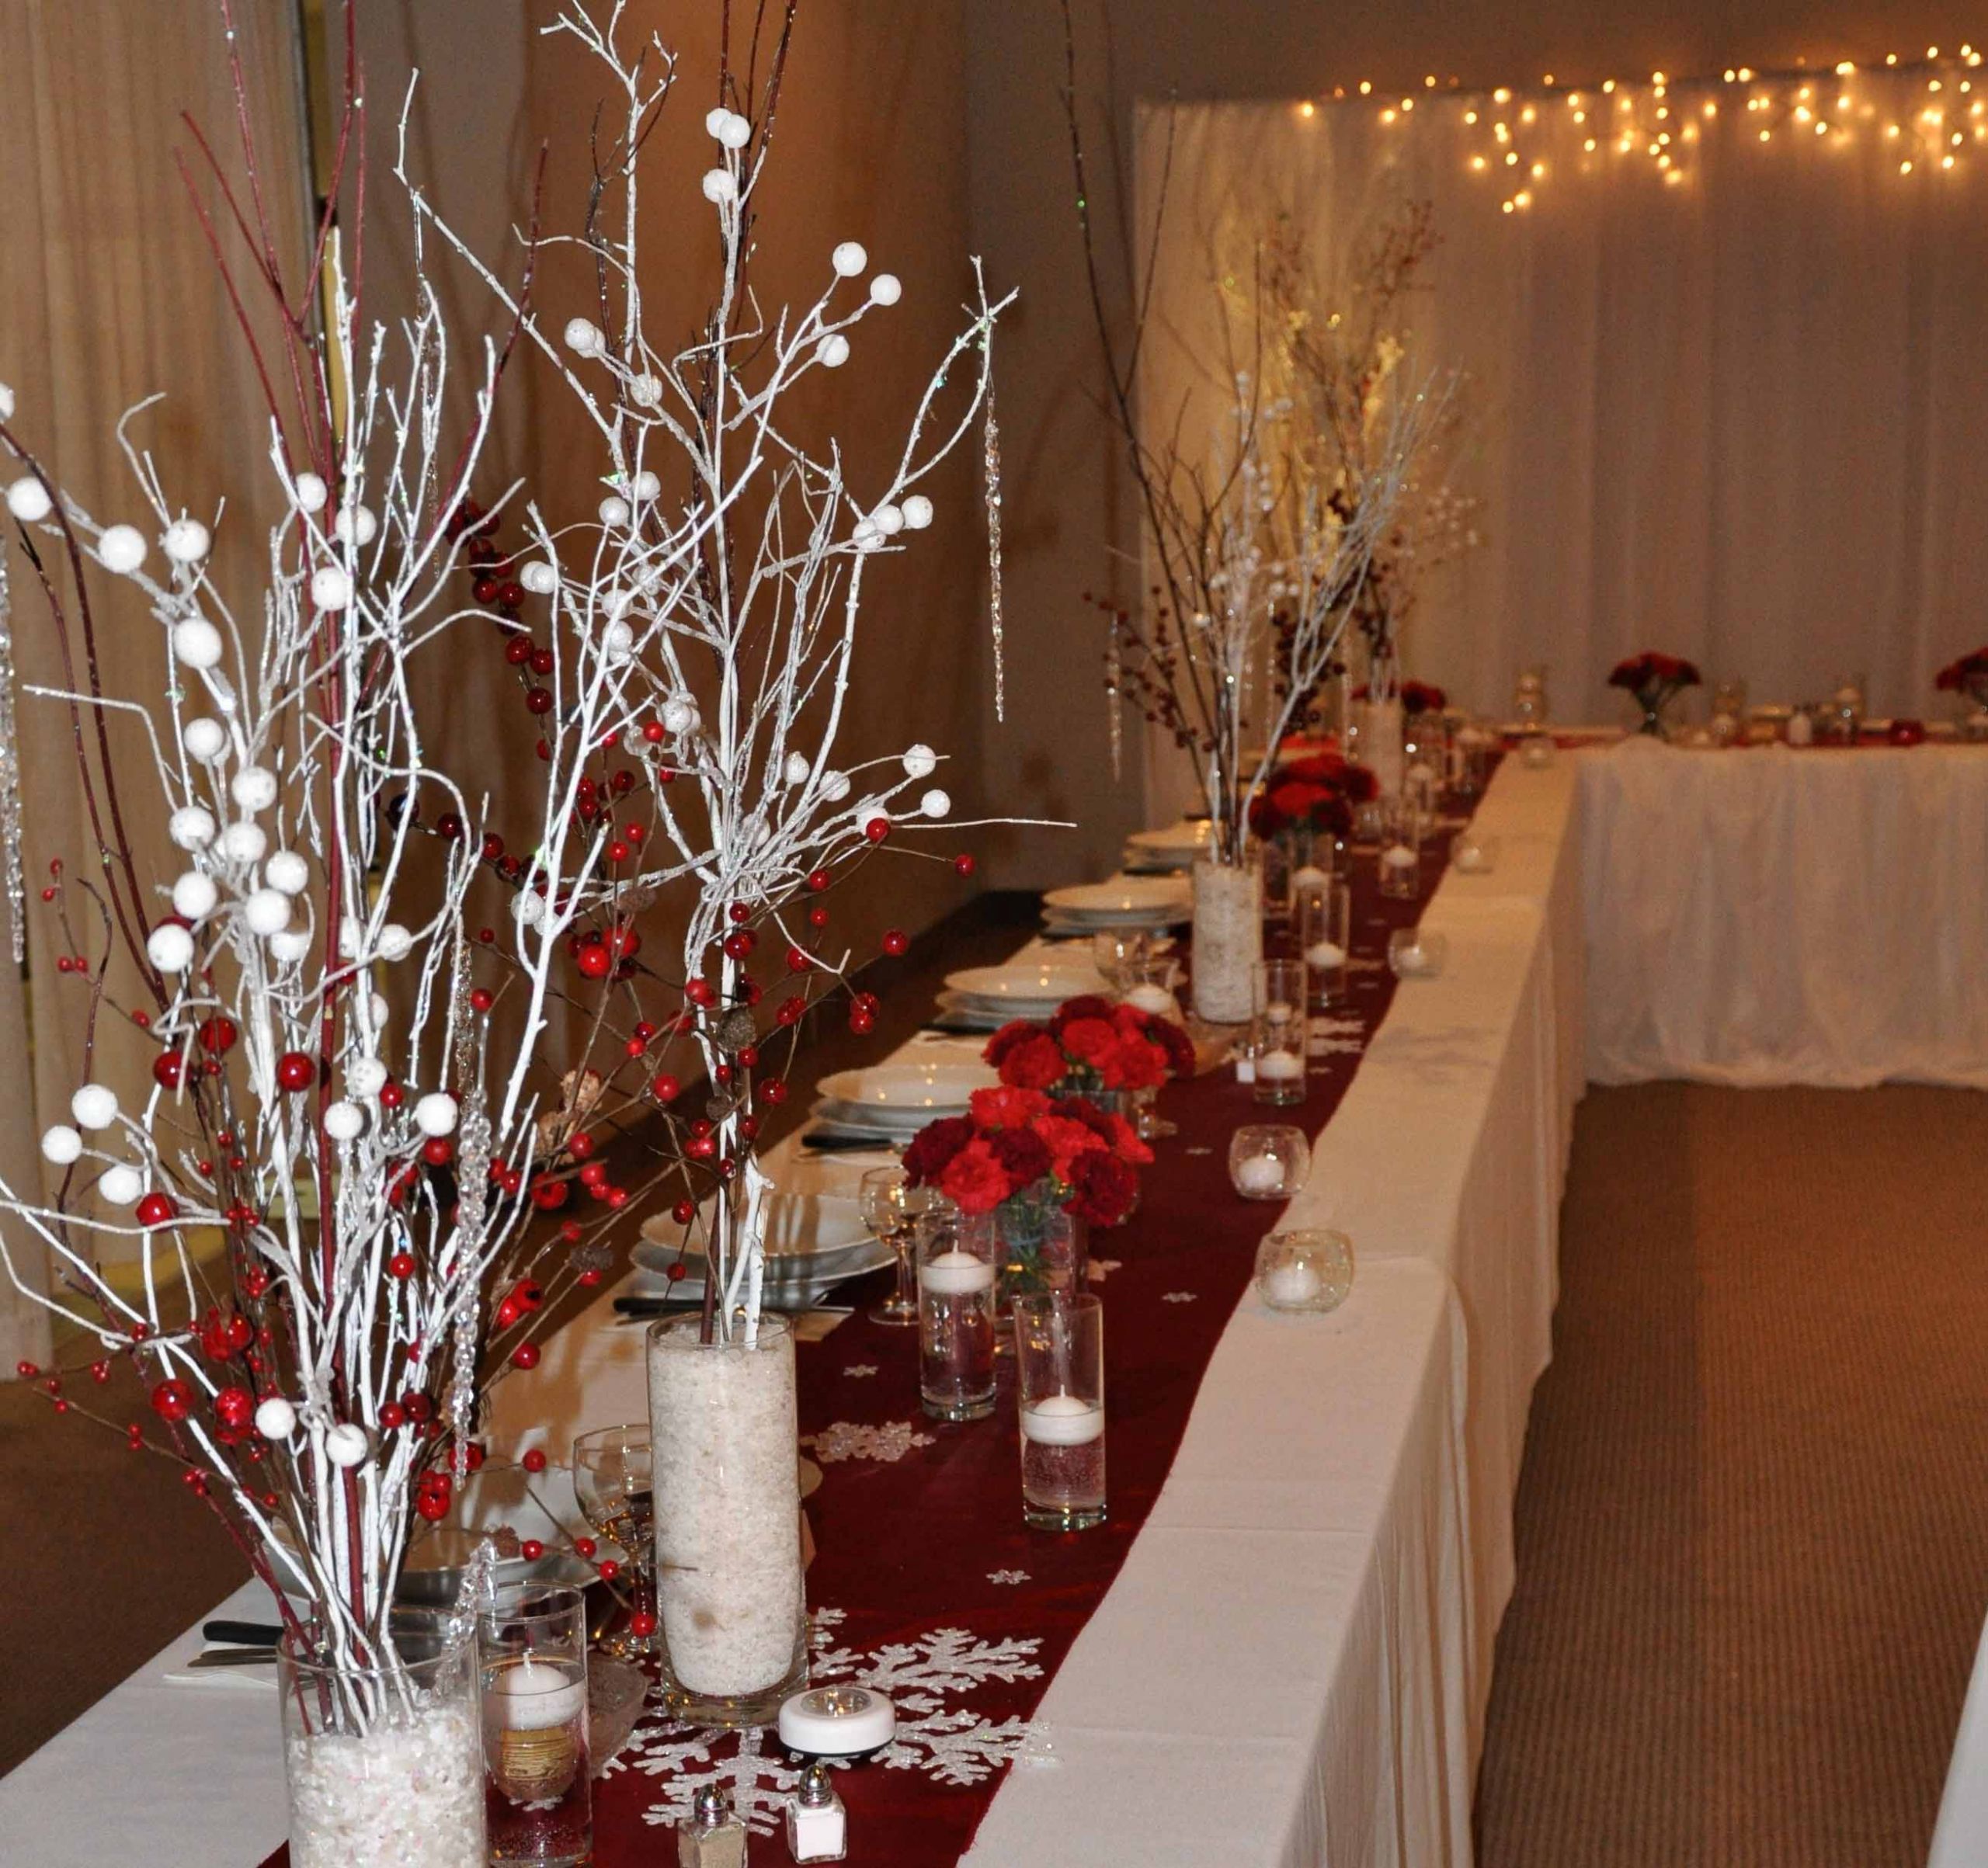 Where To Buy Wedding Decorations
 Five Exciting Parts Attending Winter Themed Decorations